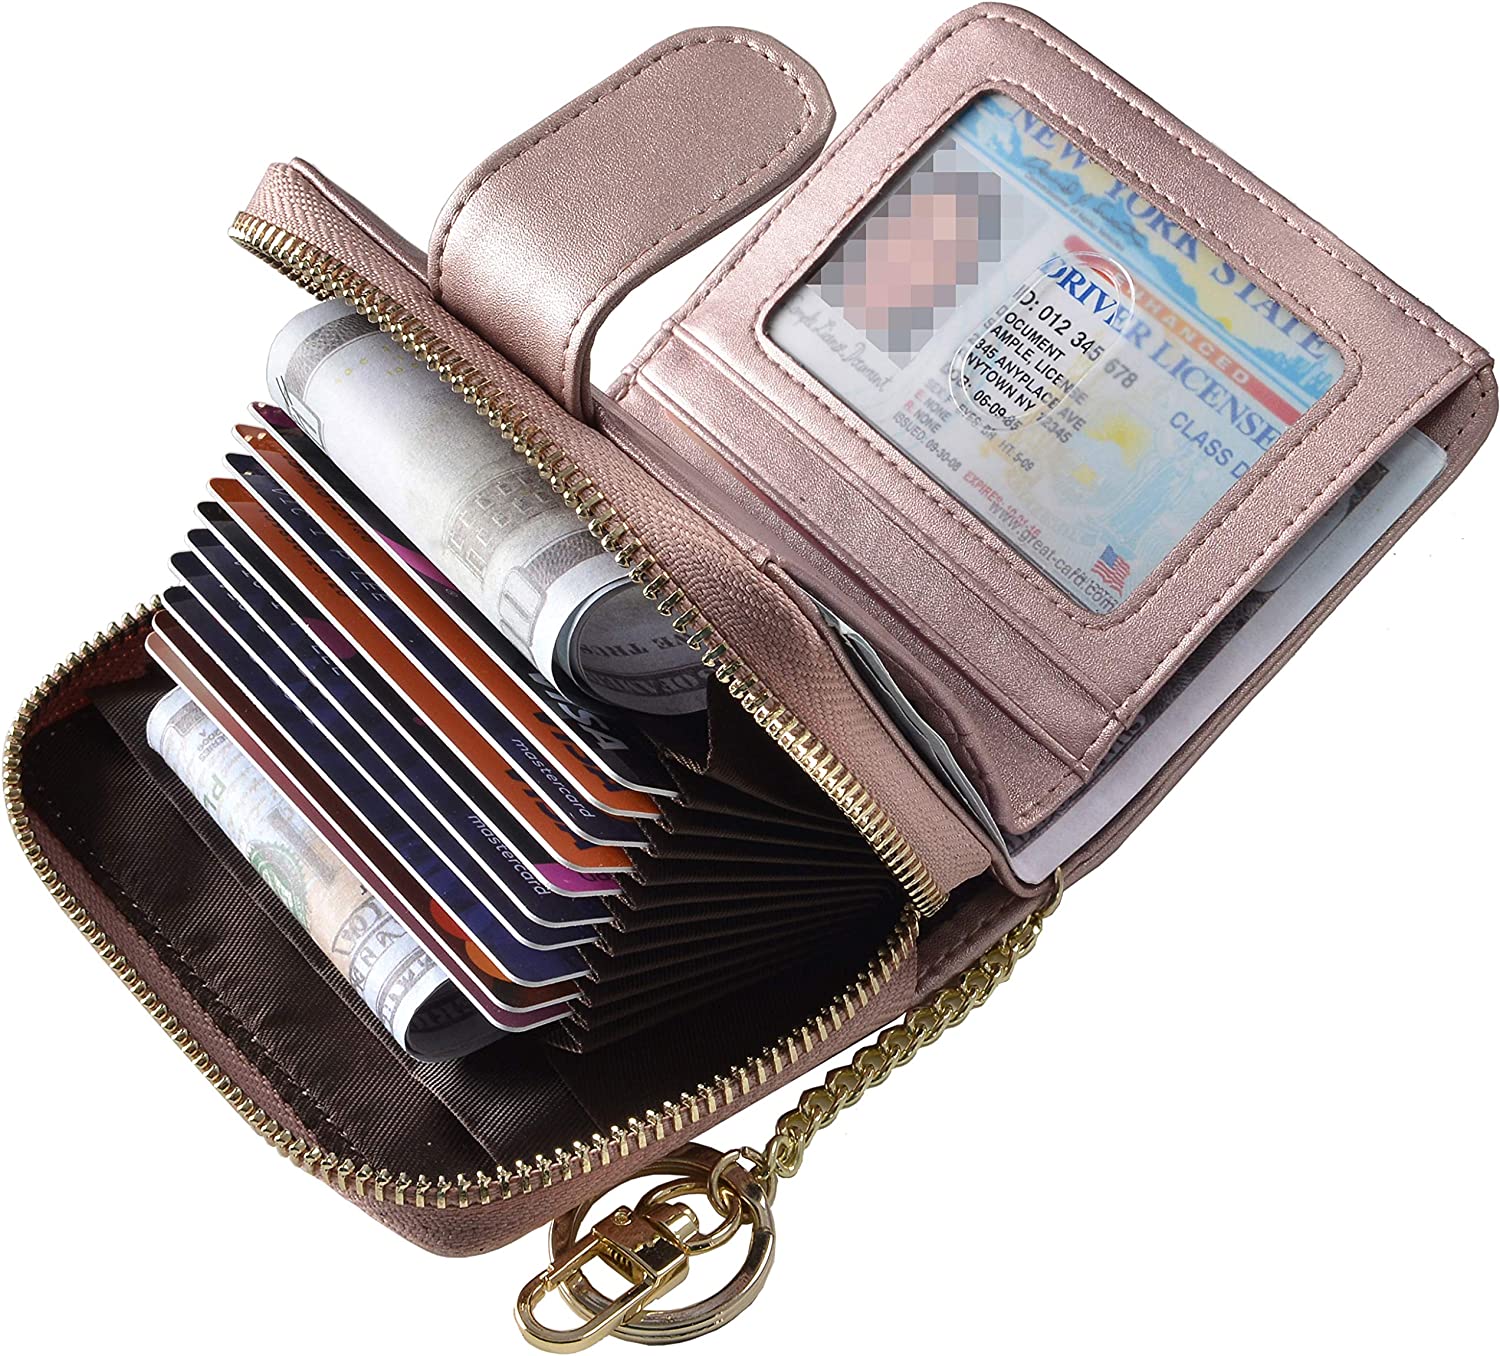 Beurlike Womens RFID Credit Card Holder Organizer Case Leather Security Wallet 